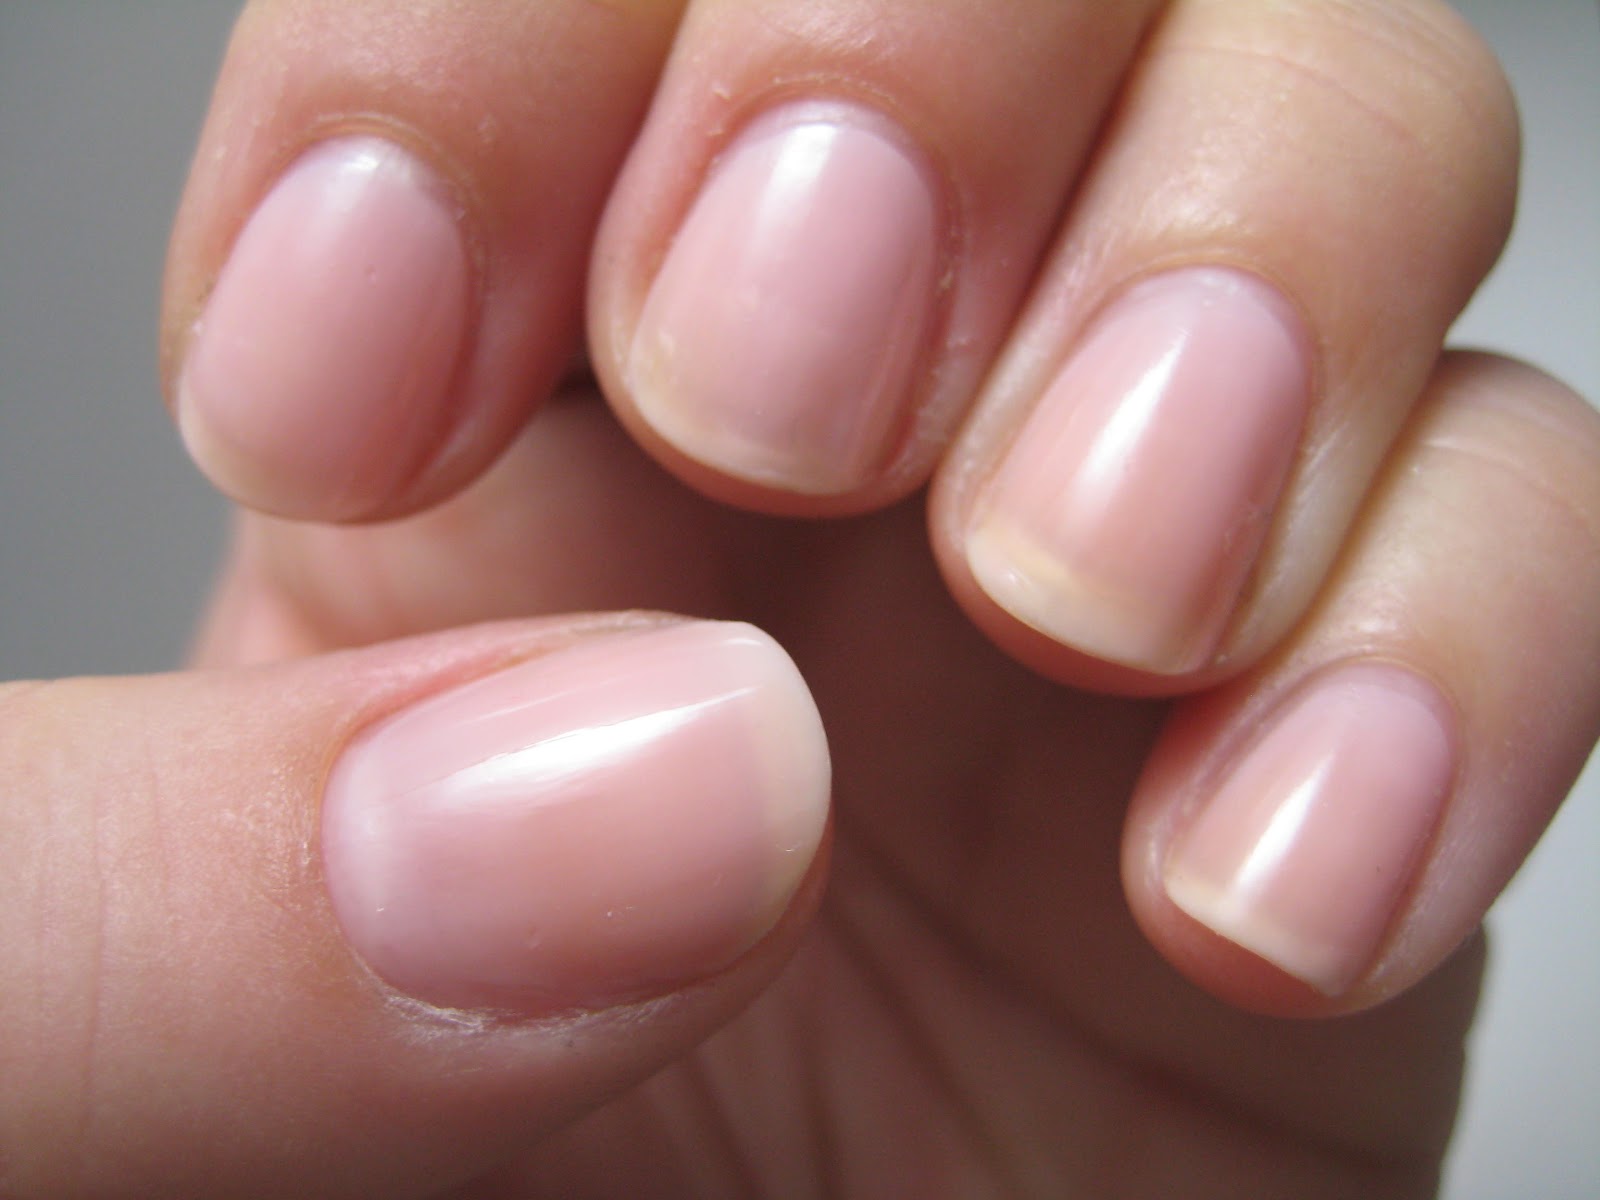 6. "Tips for Maintaining Healthy Nails During Pregnancy" - wide 5